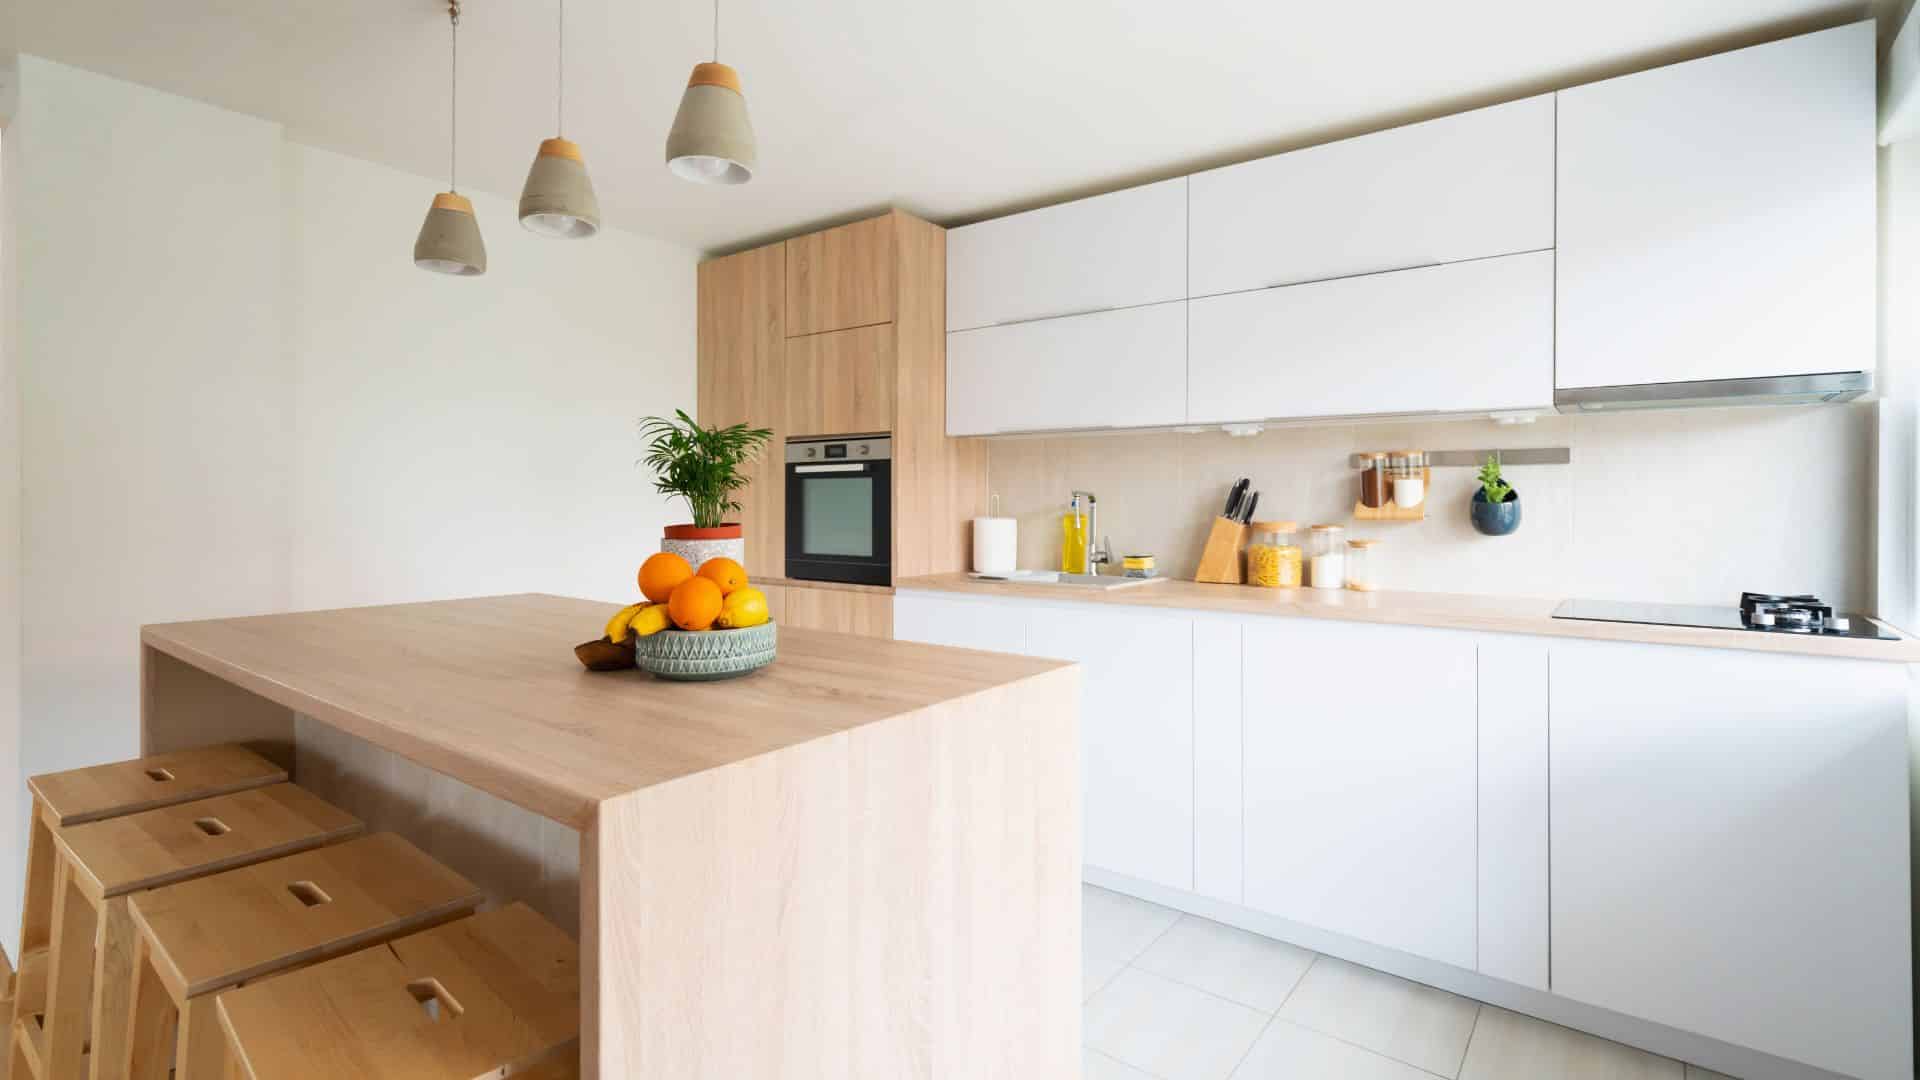 Upgrade your kitchen with the ideal countertops. Dive into our guide to compare materials from quartz to laminate, ensuring style meets functionality.